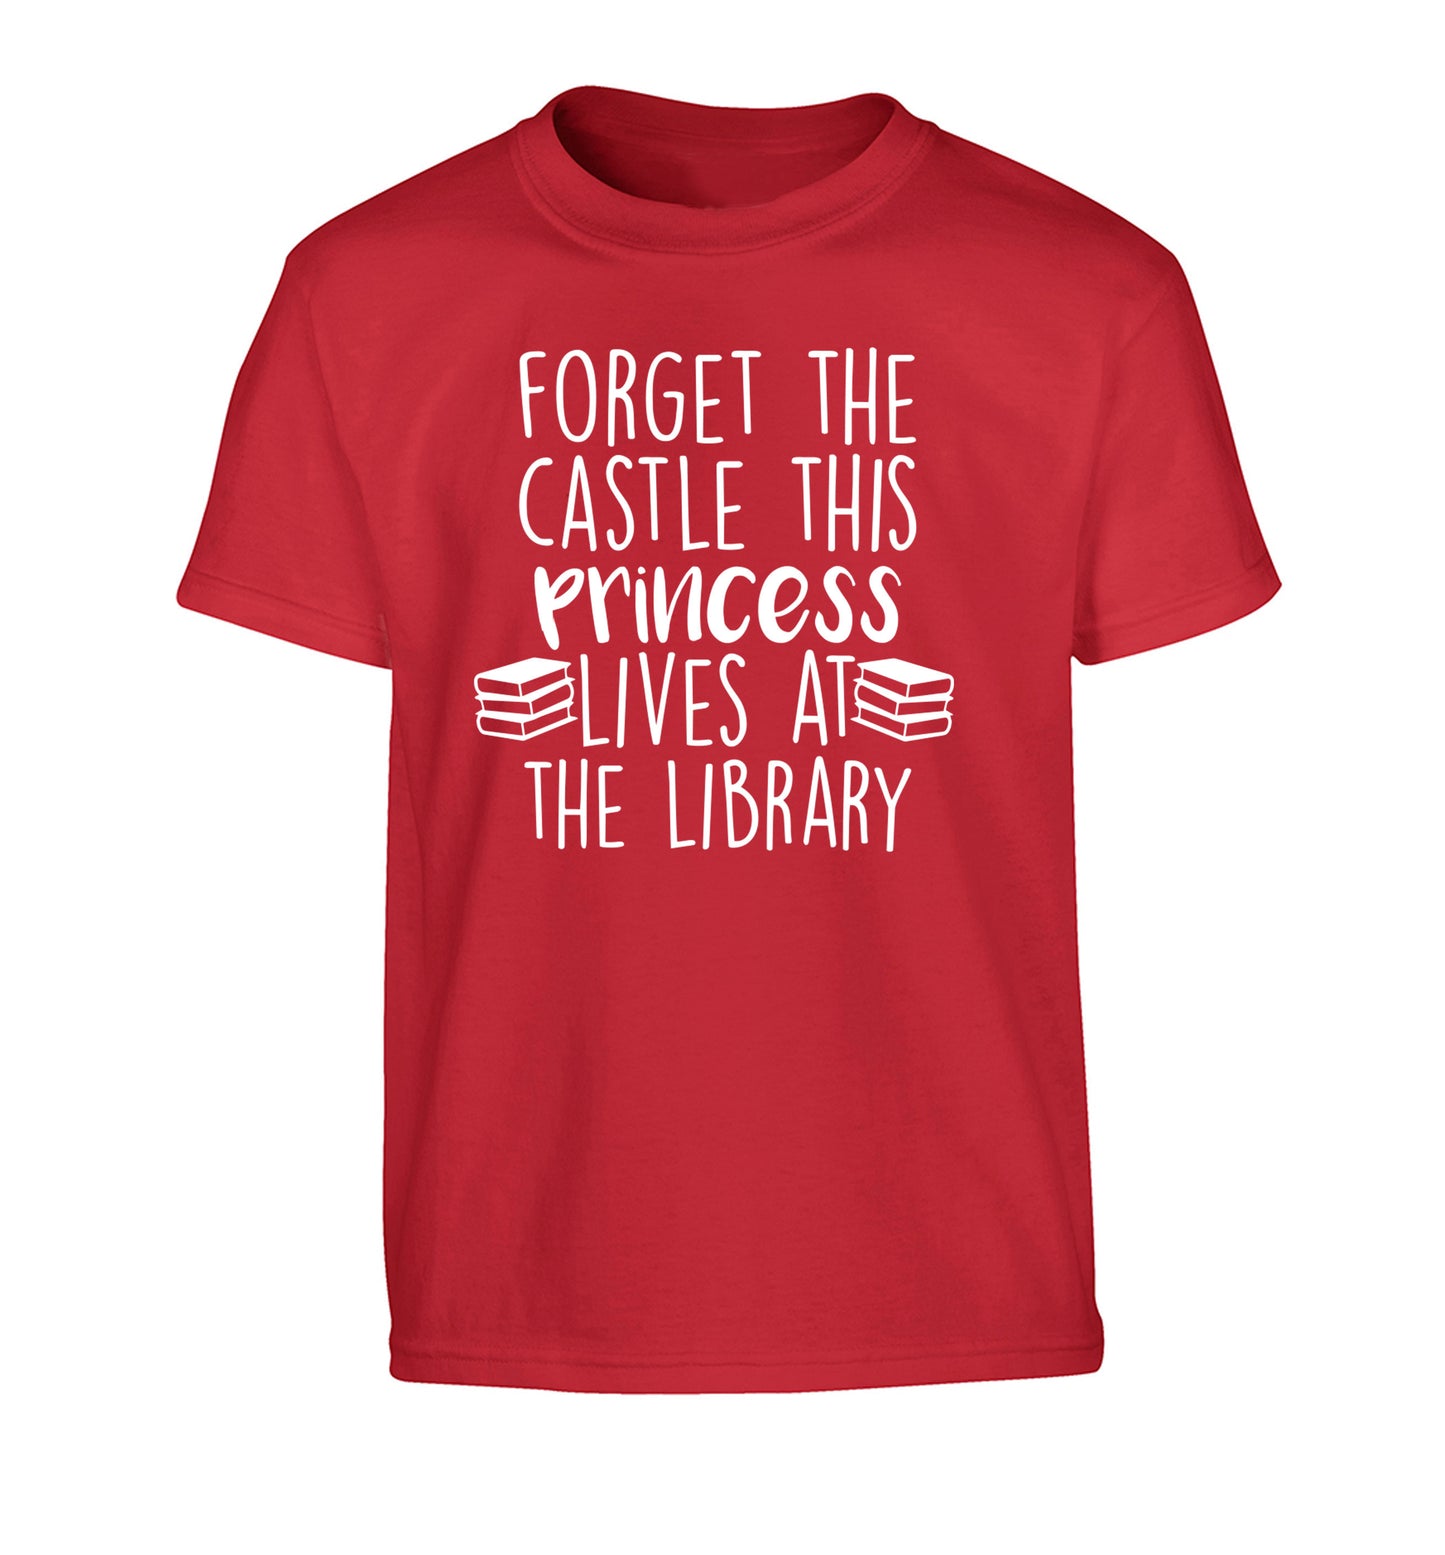 Forget the castle this princess lives at the library Children's red Tshirt 12-14 Years